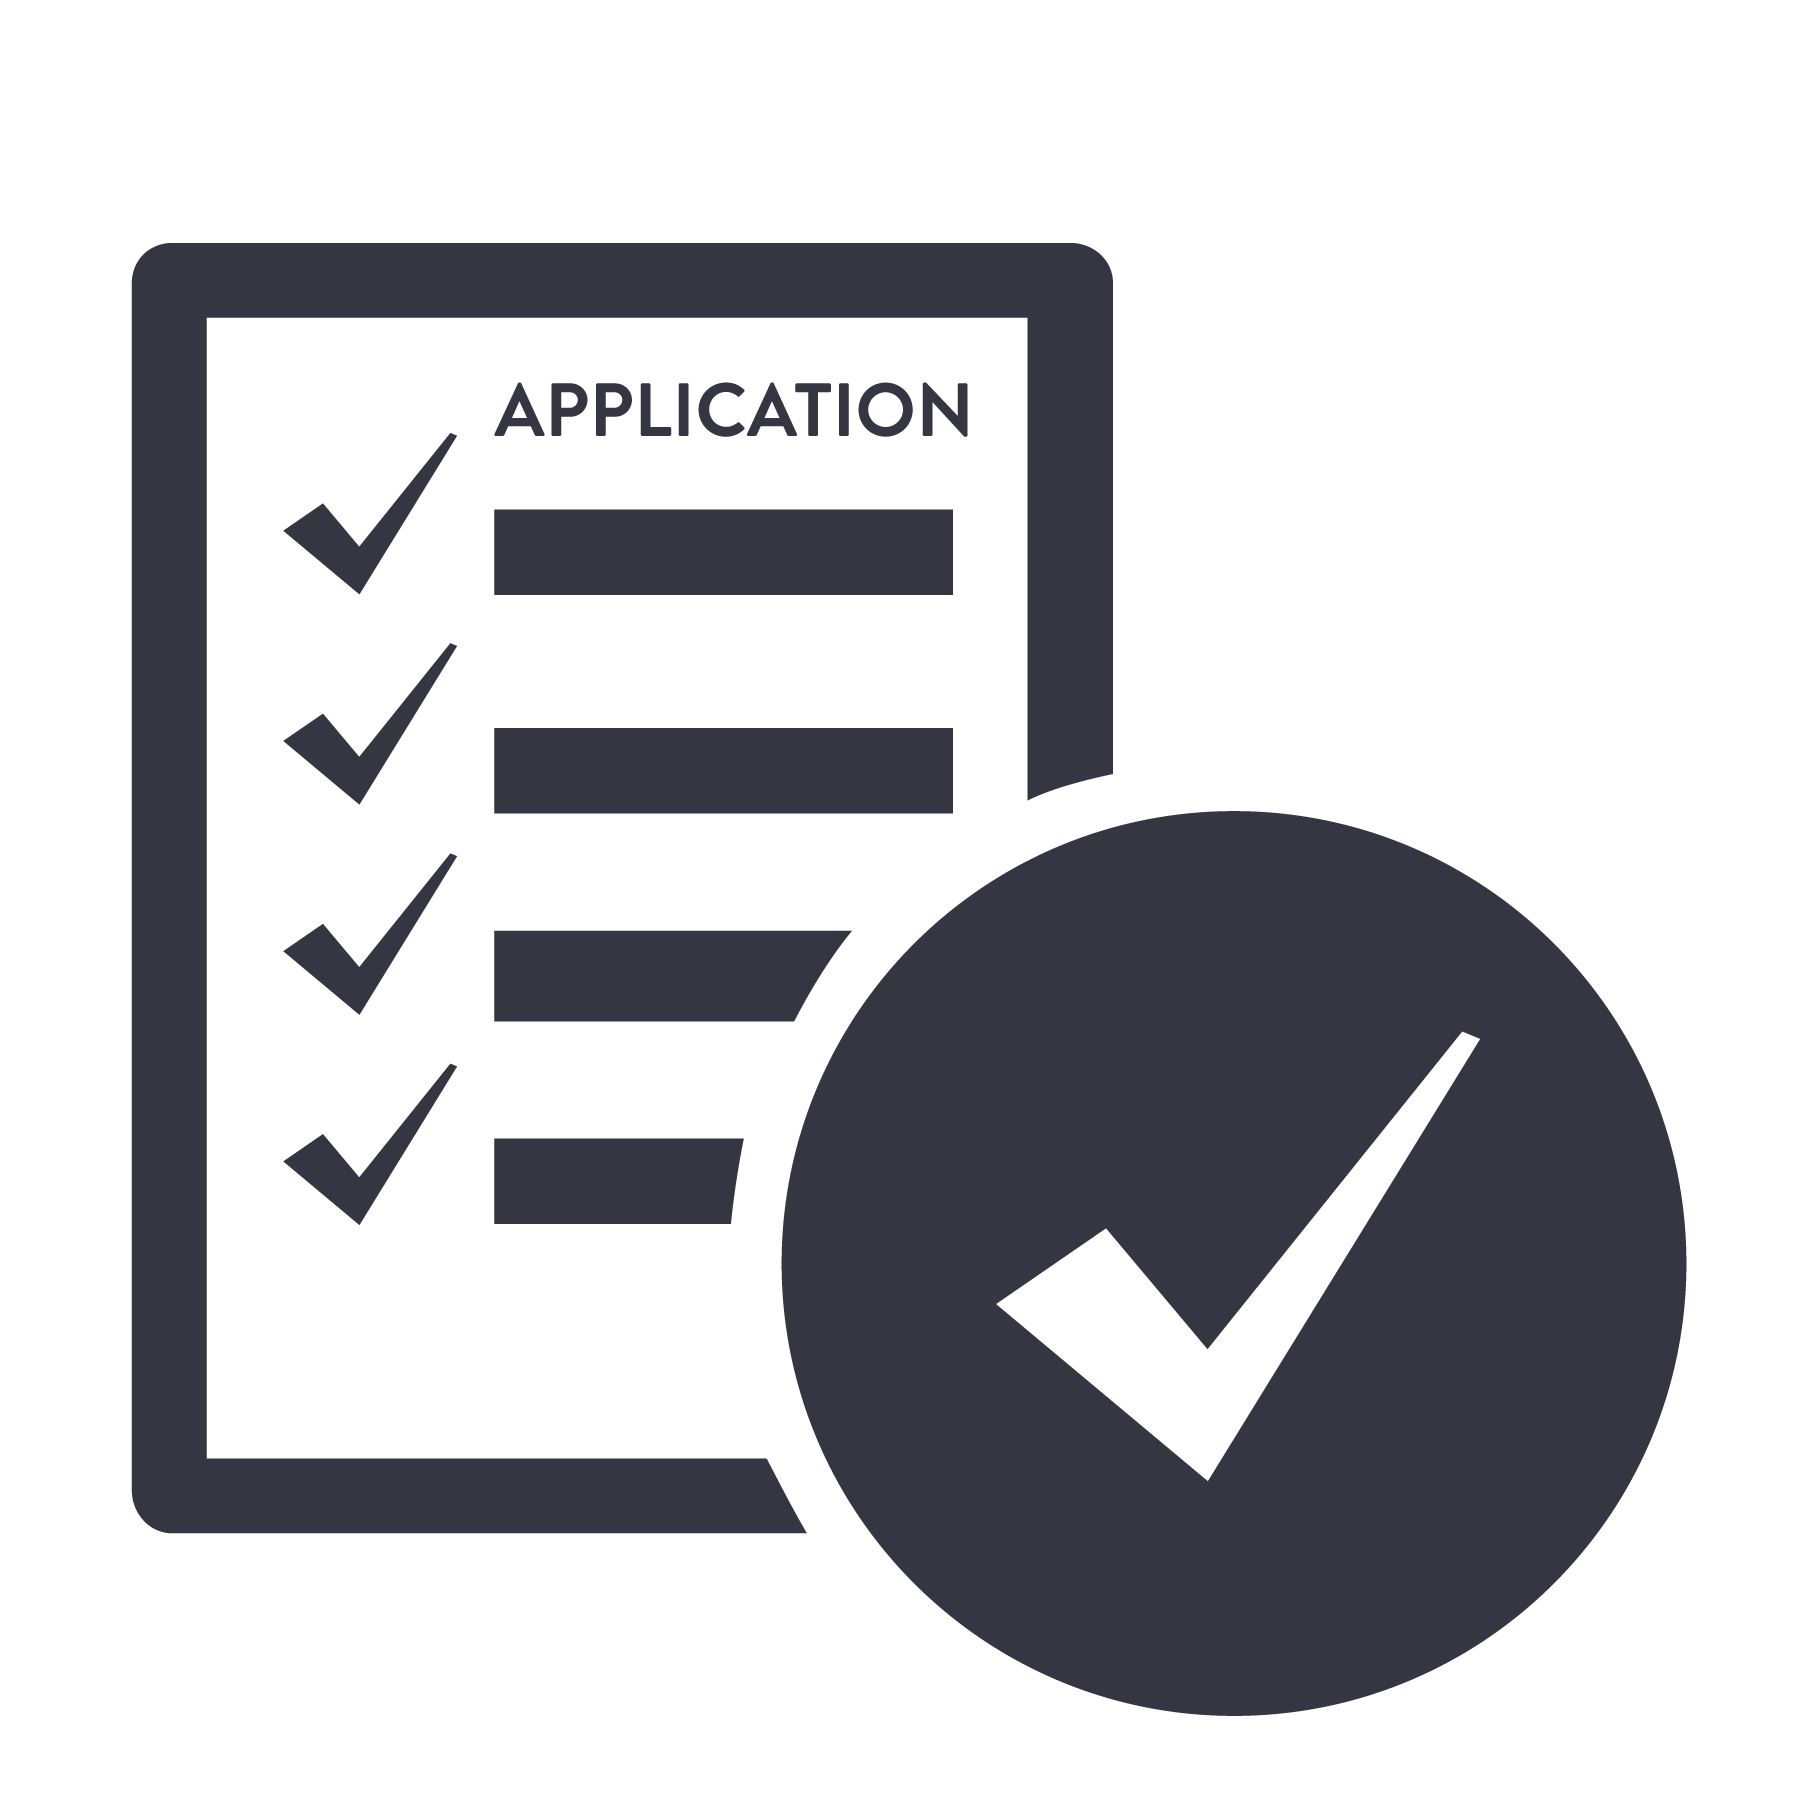 Application steps icon